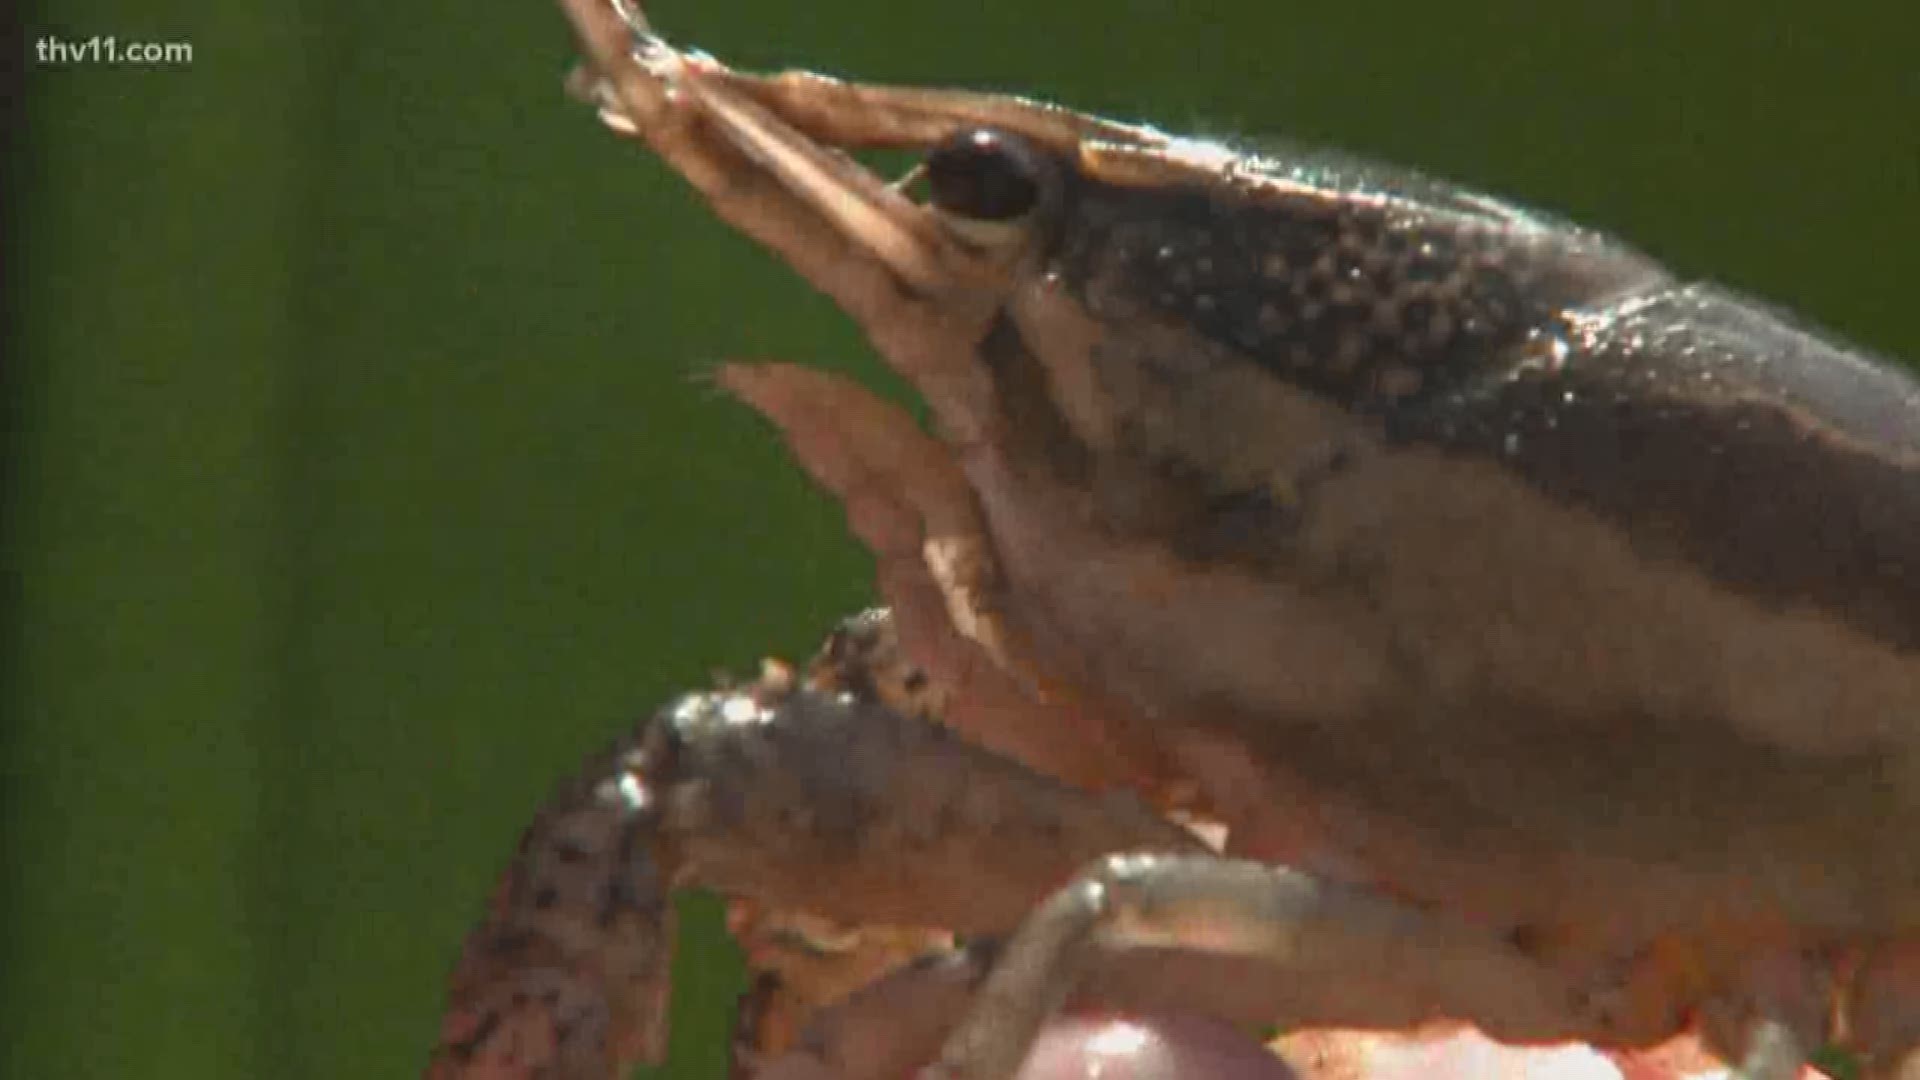 A local biologist has found 2 new species of crayfish.